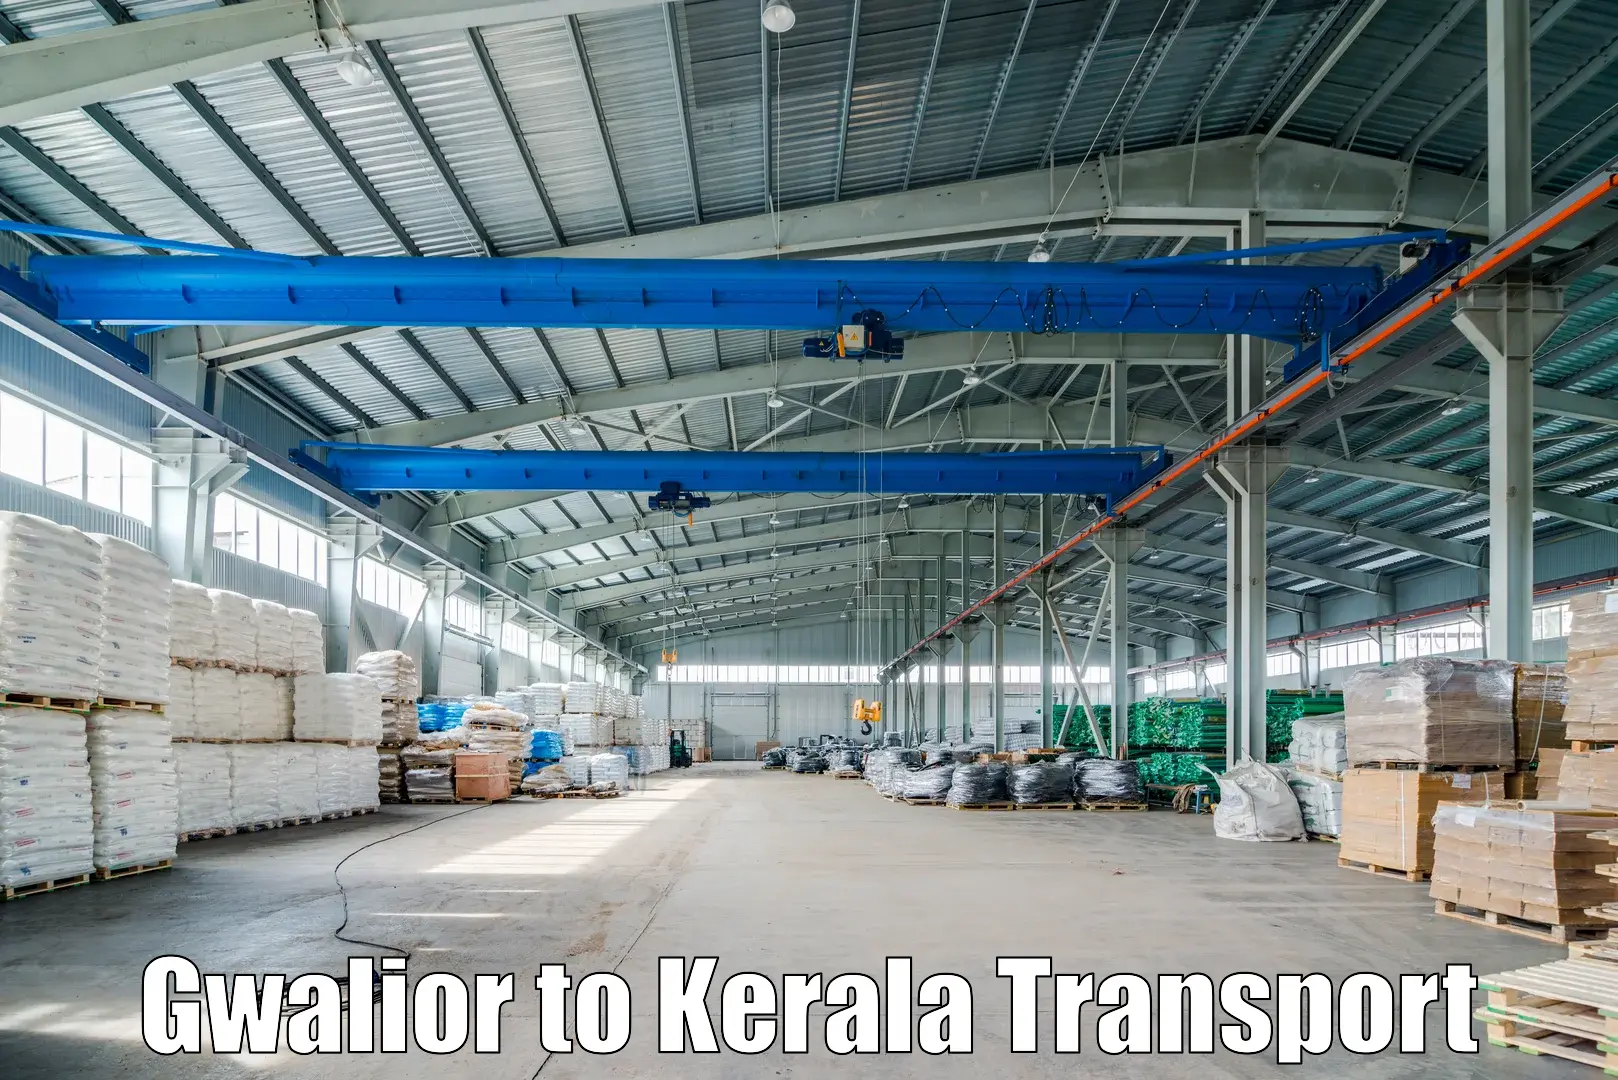 Transport in sharing Gwalior to Kerala